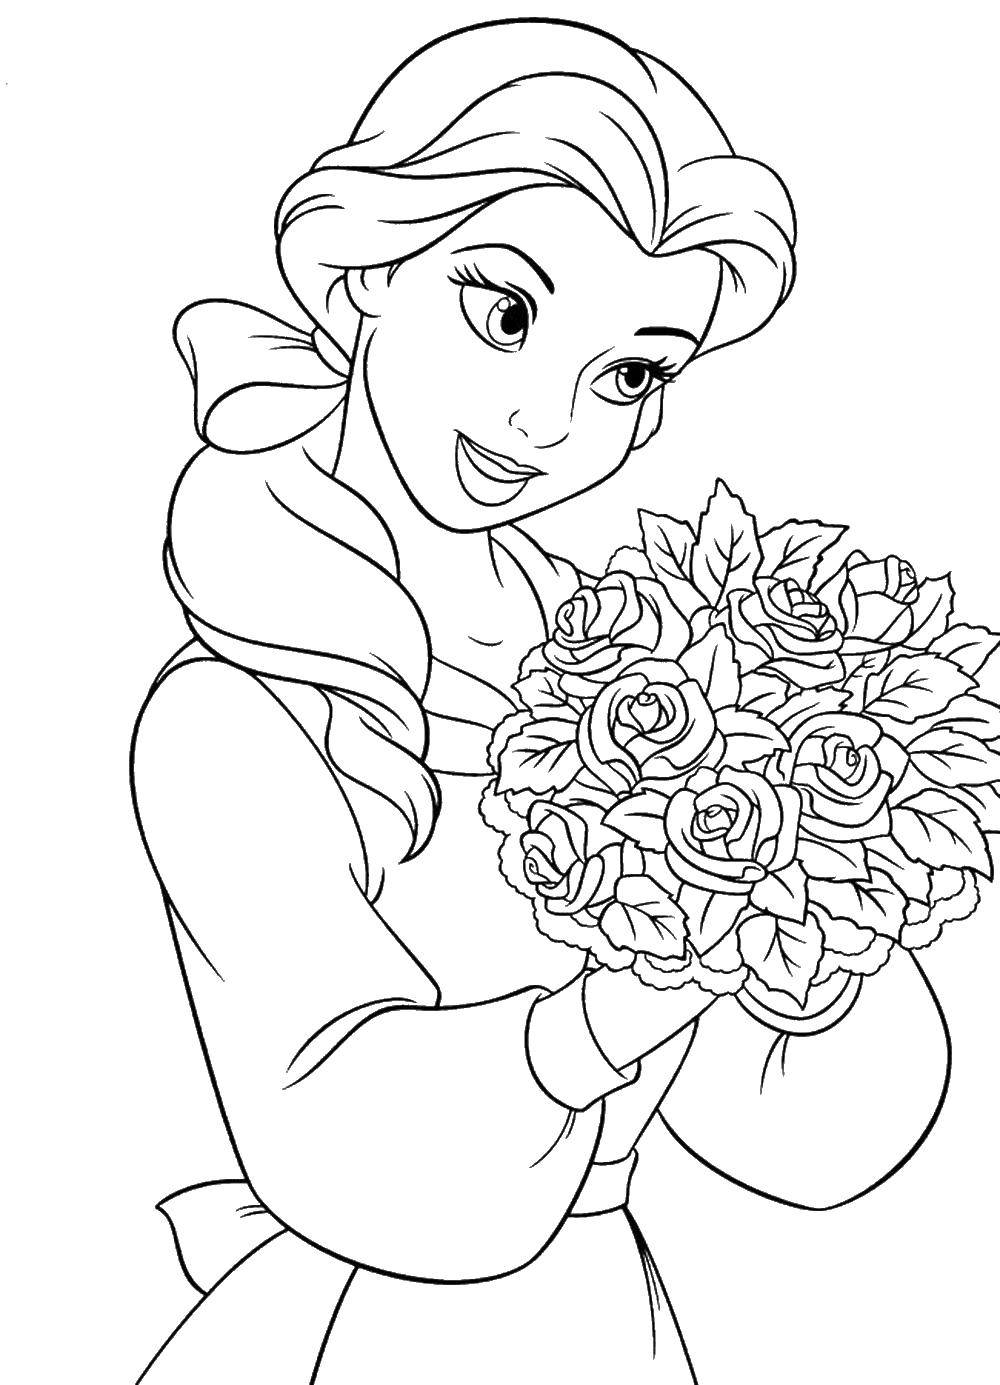 Coloring Belle with bouquet of roses. Category Princess. Tags:  Princess , Belle, flowers, Disney.